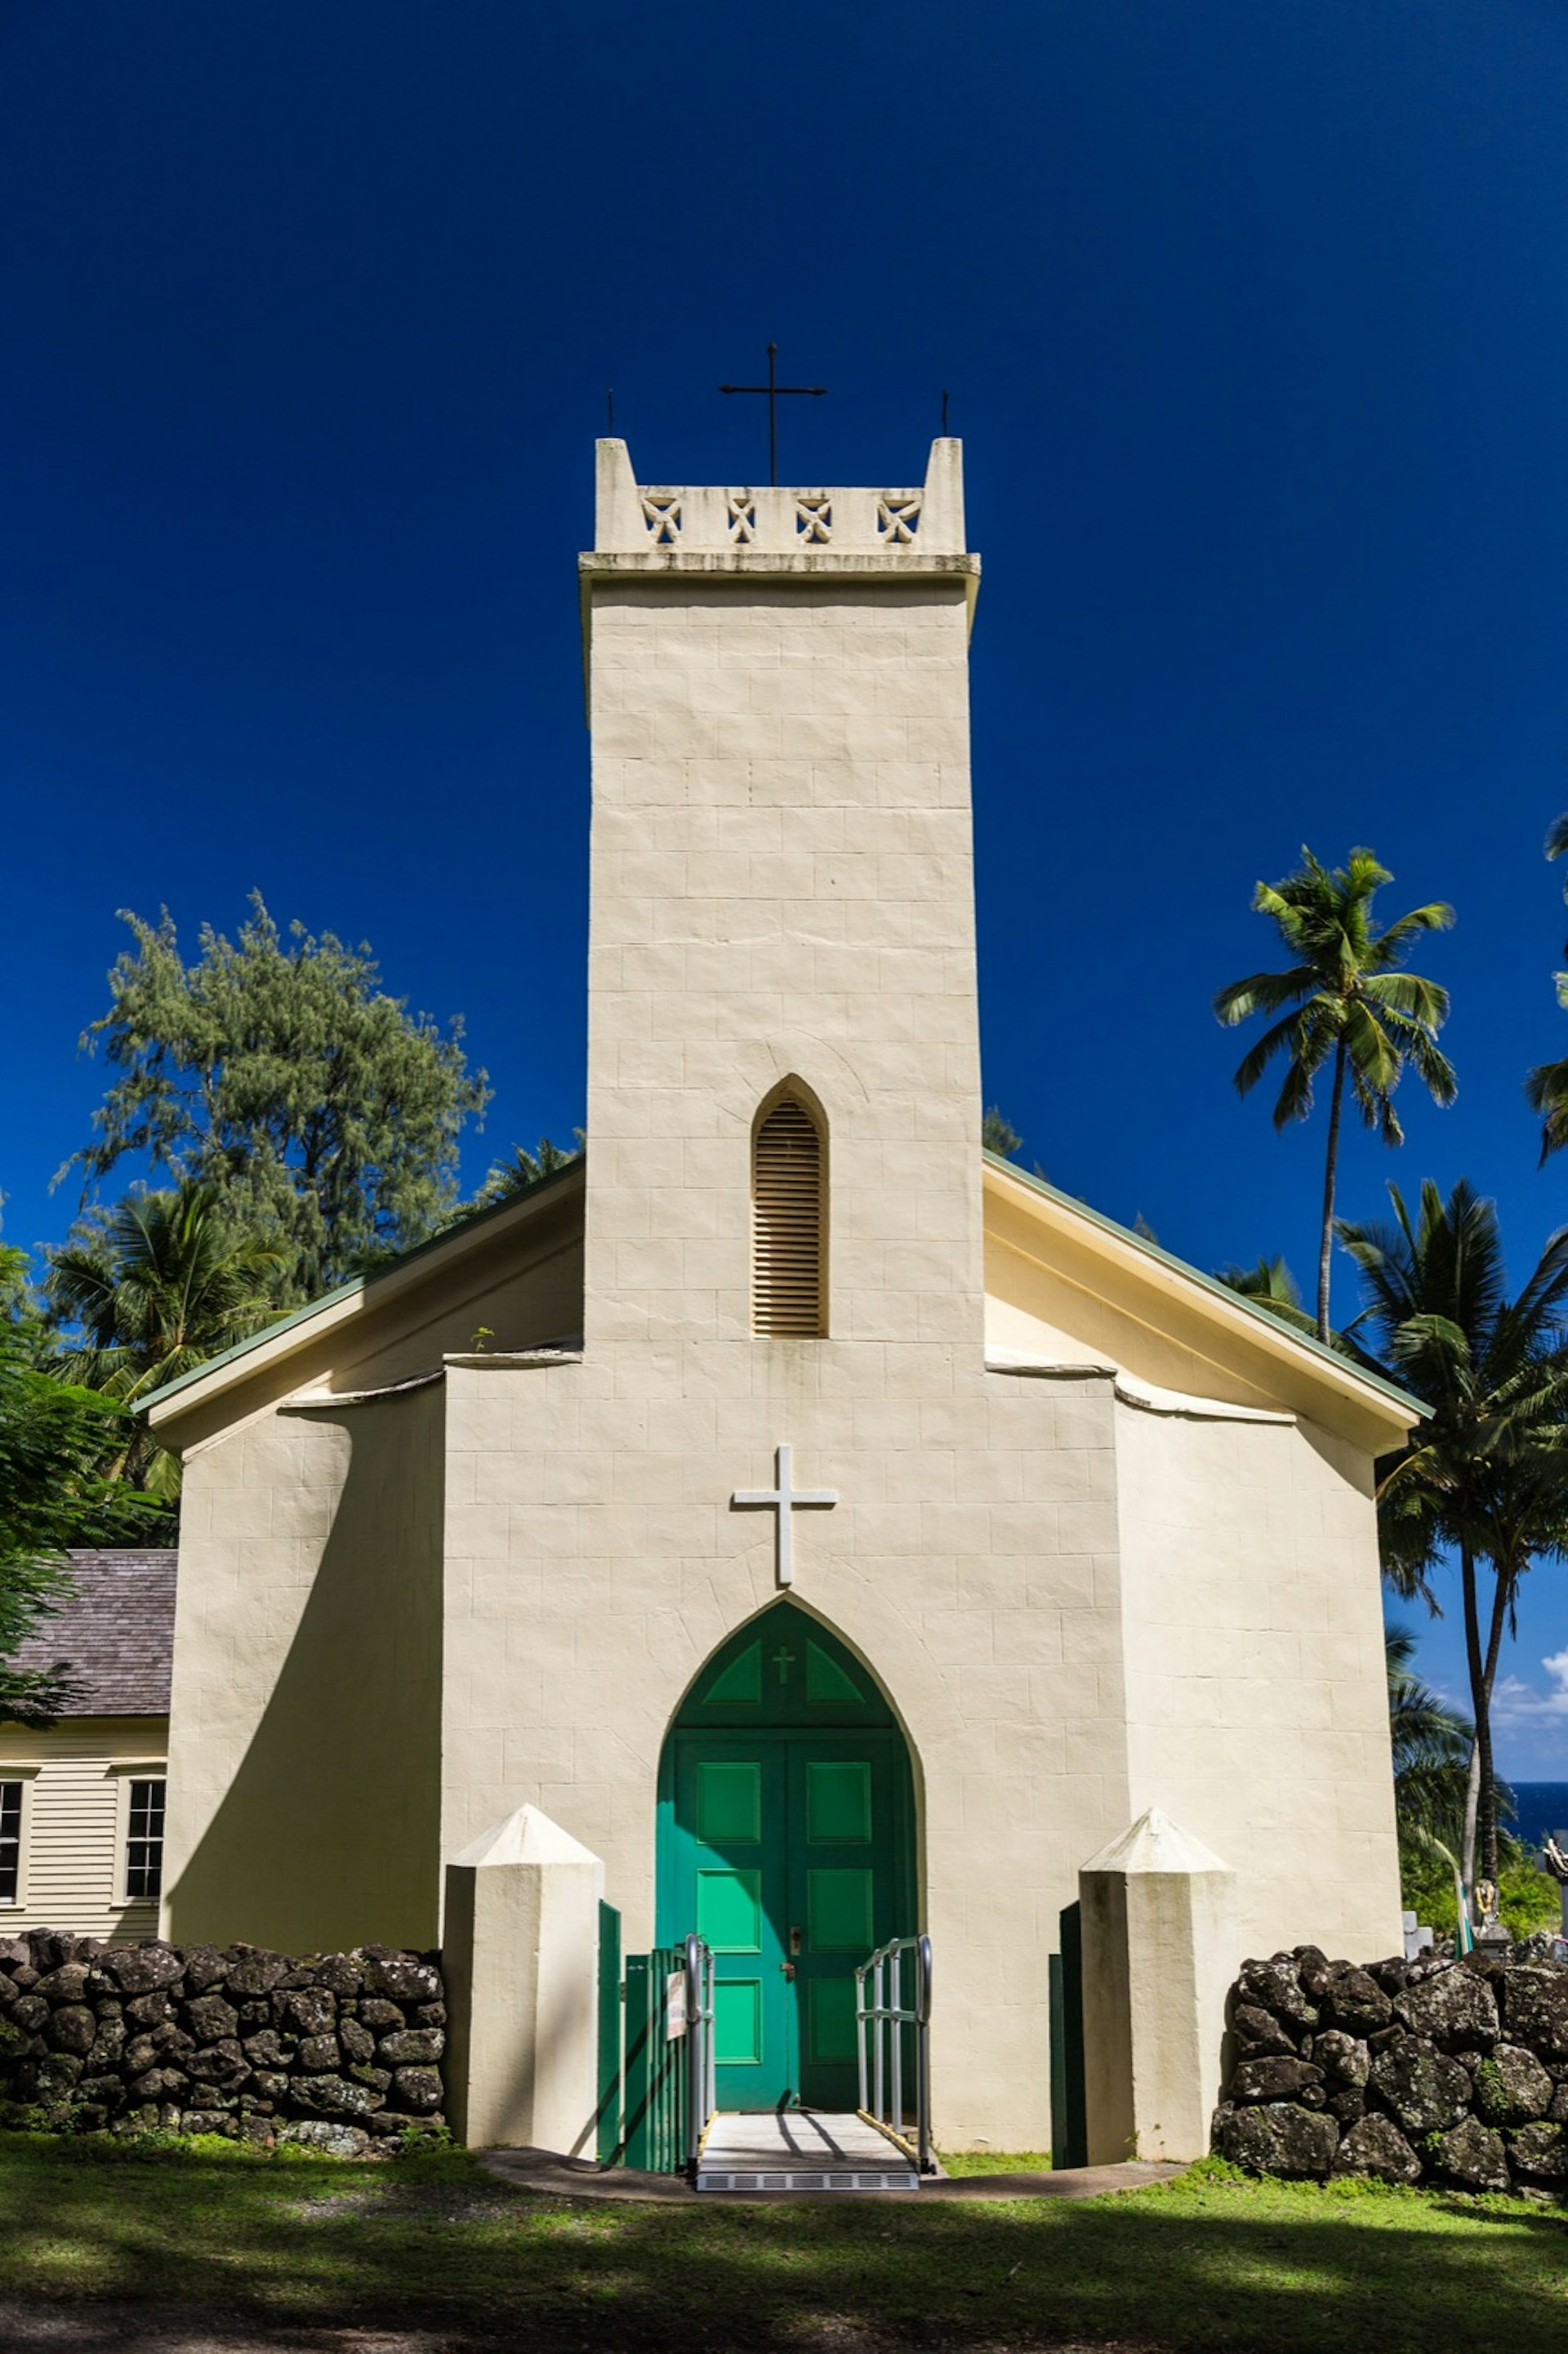 A small, cream-colored church with a bright green arched doorway and a central, rectangular steeple